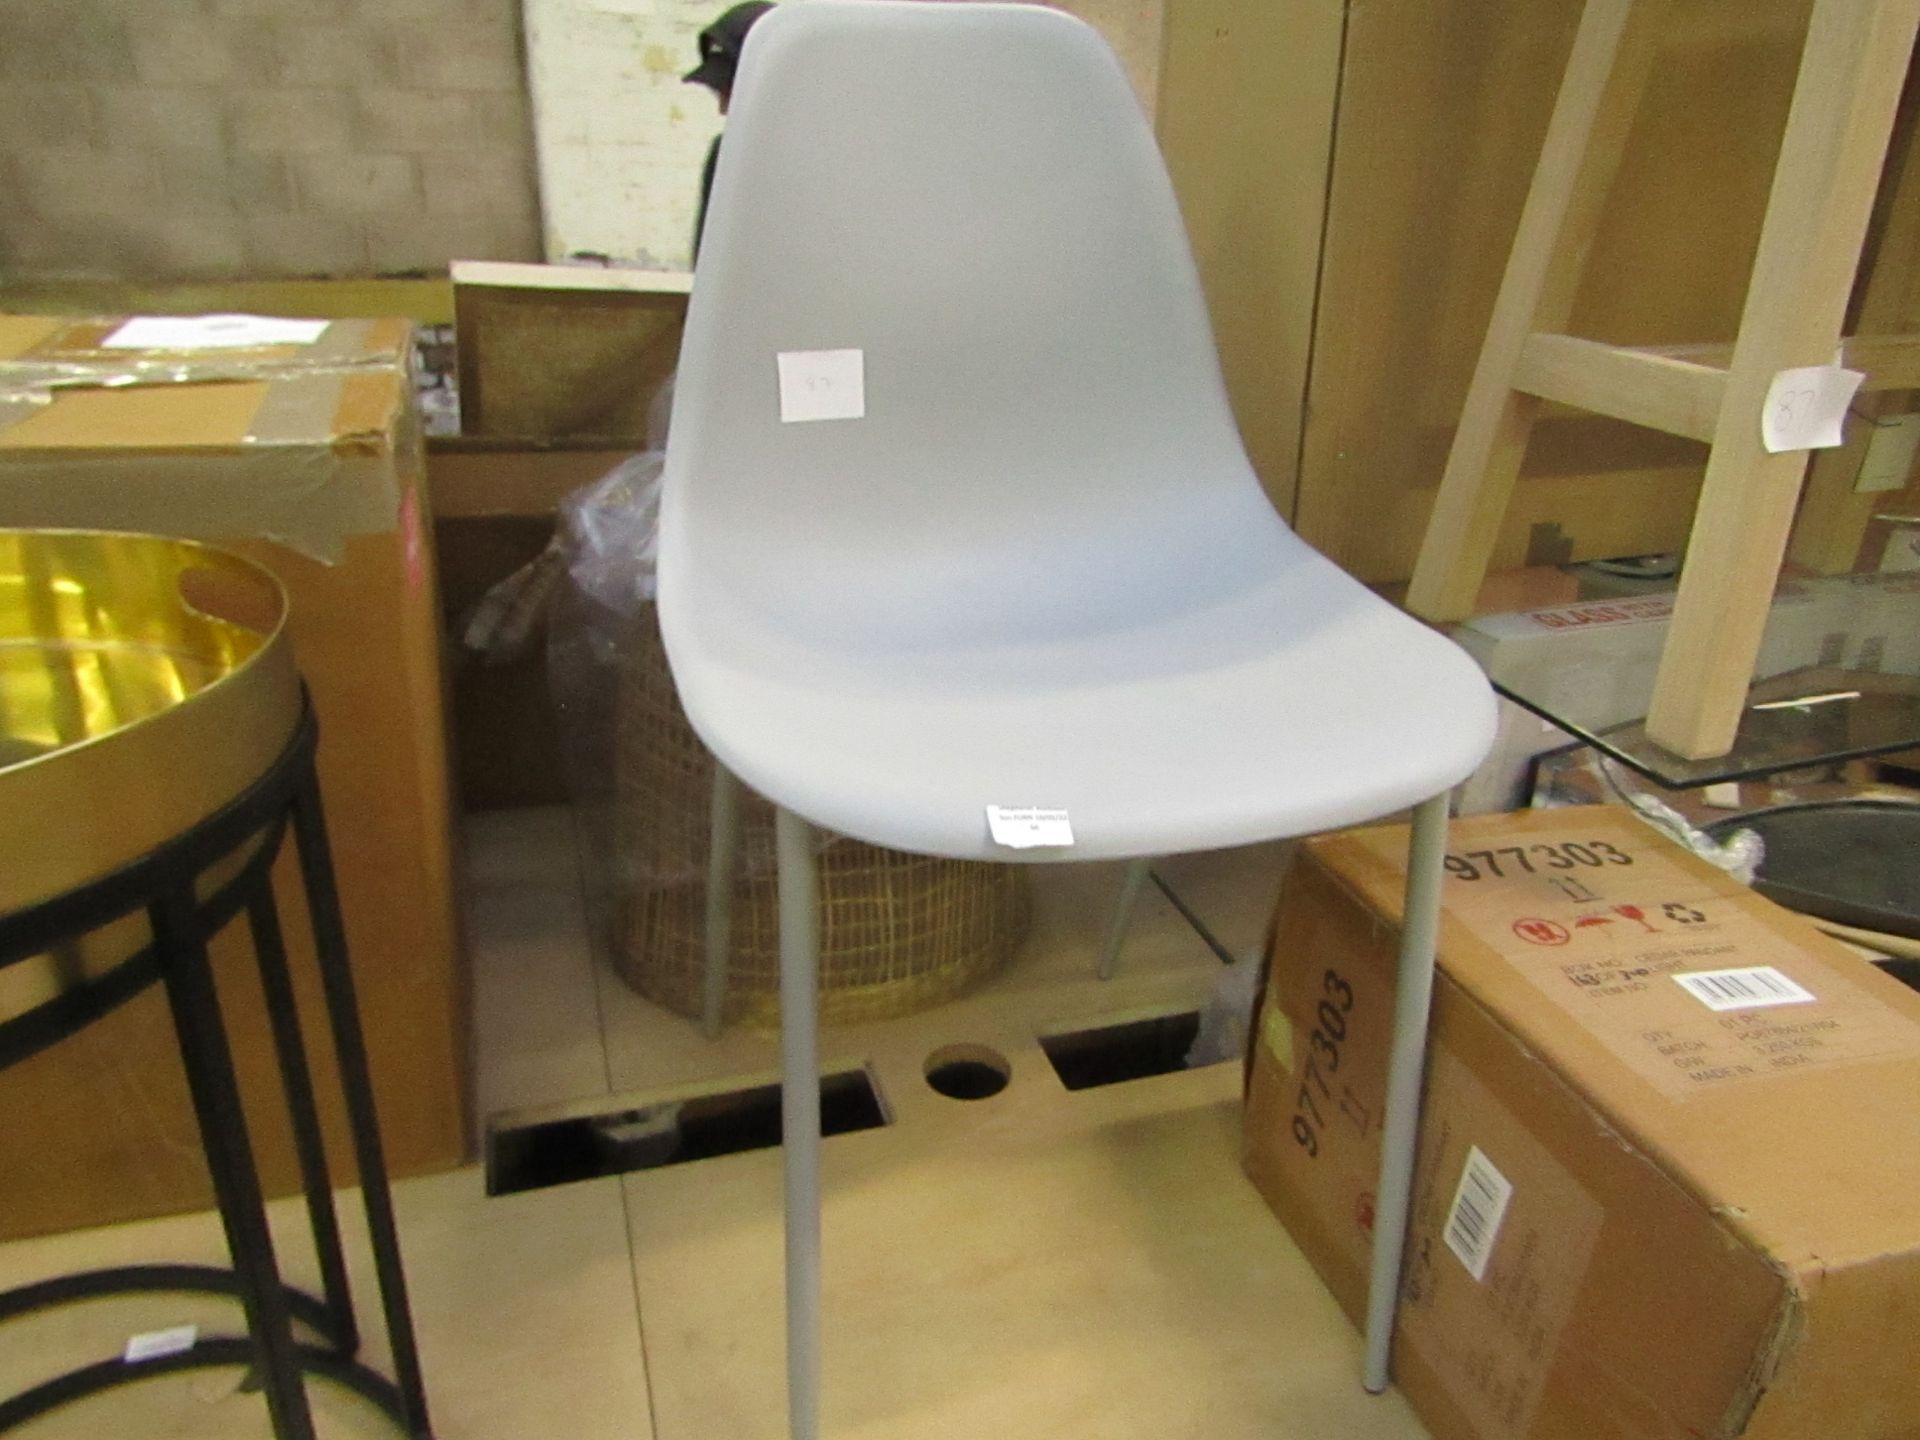 1 x COX & COX NEW Willbrook Chair - Soft grey RRP £75 SKU COX-2030204 TOTAL RRP £75 This lot is a